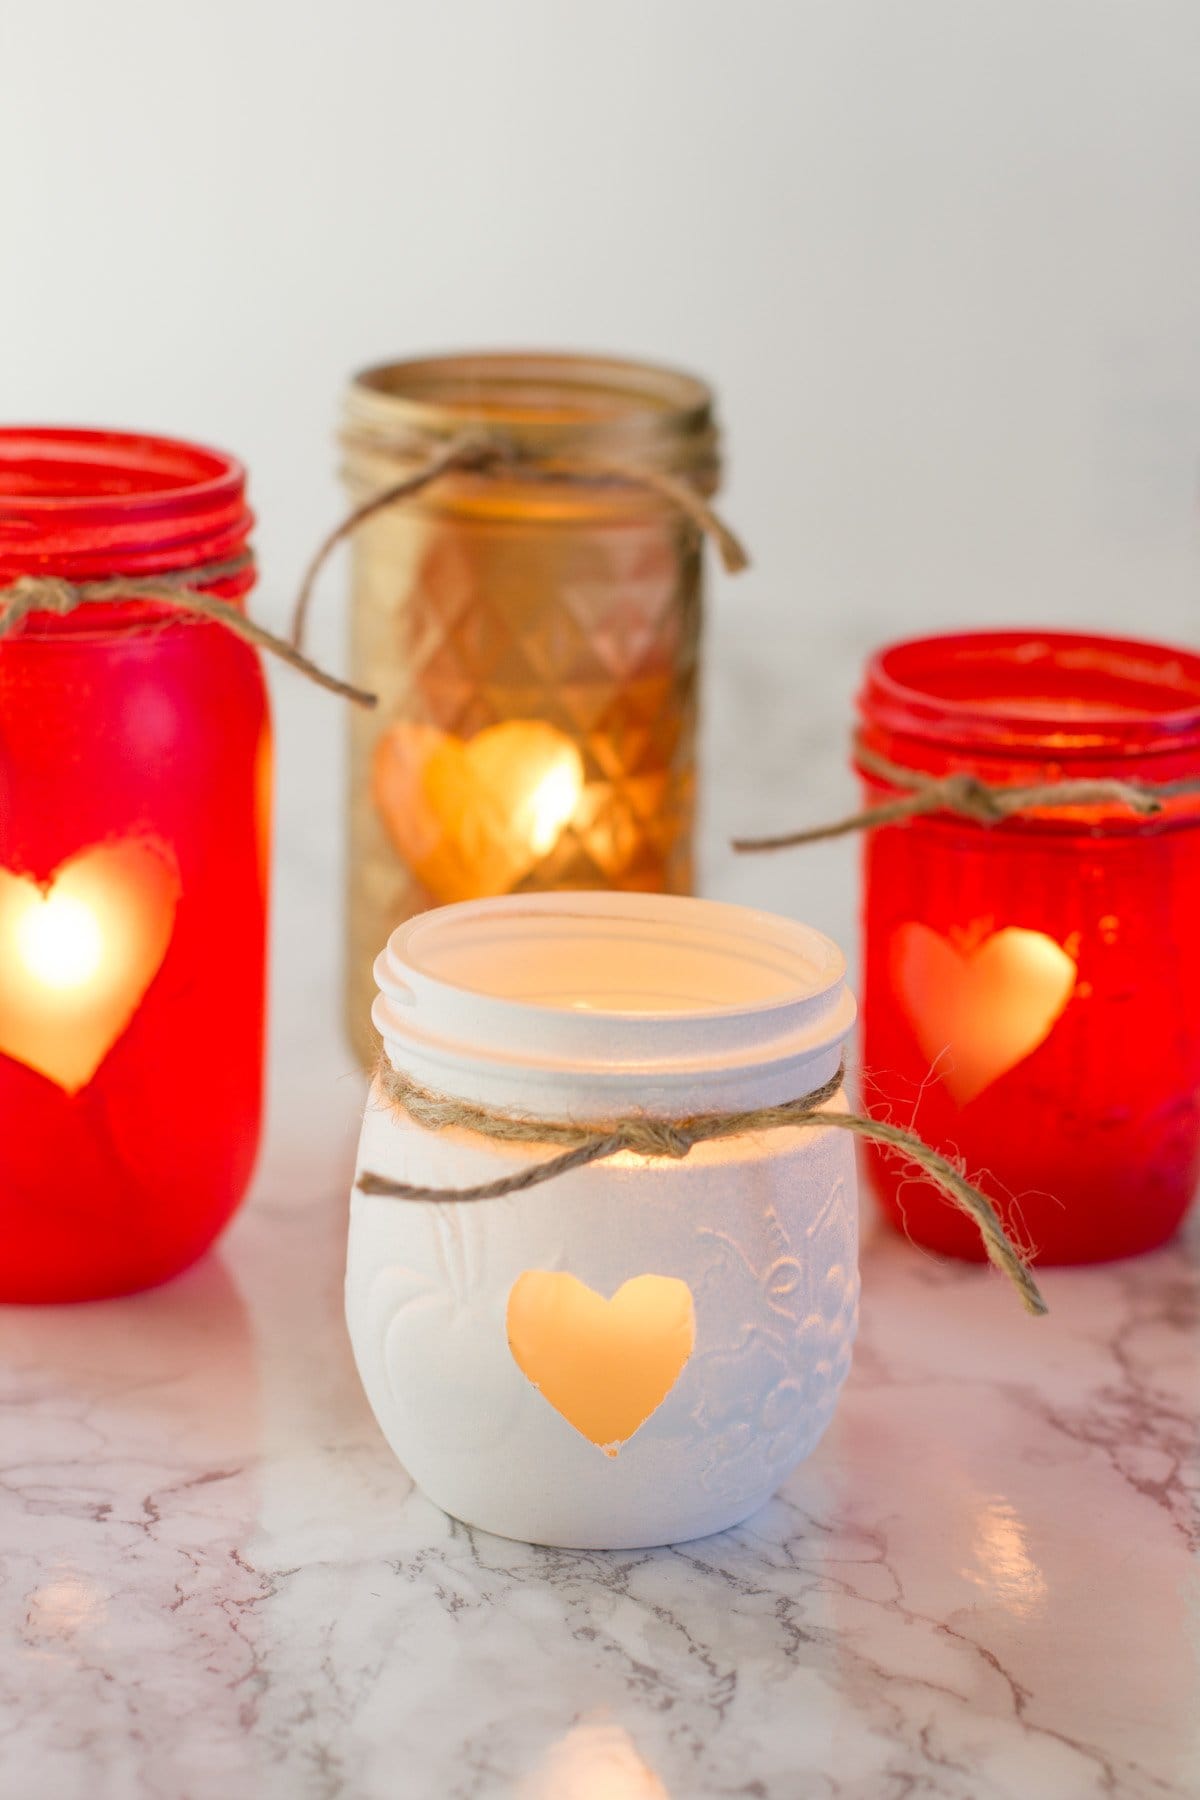 Cluster of Painted Mason Jar Votive Holders, each with a heart and a piece of twine. The jars are gold, red, and white.